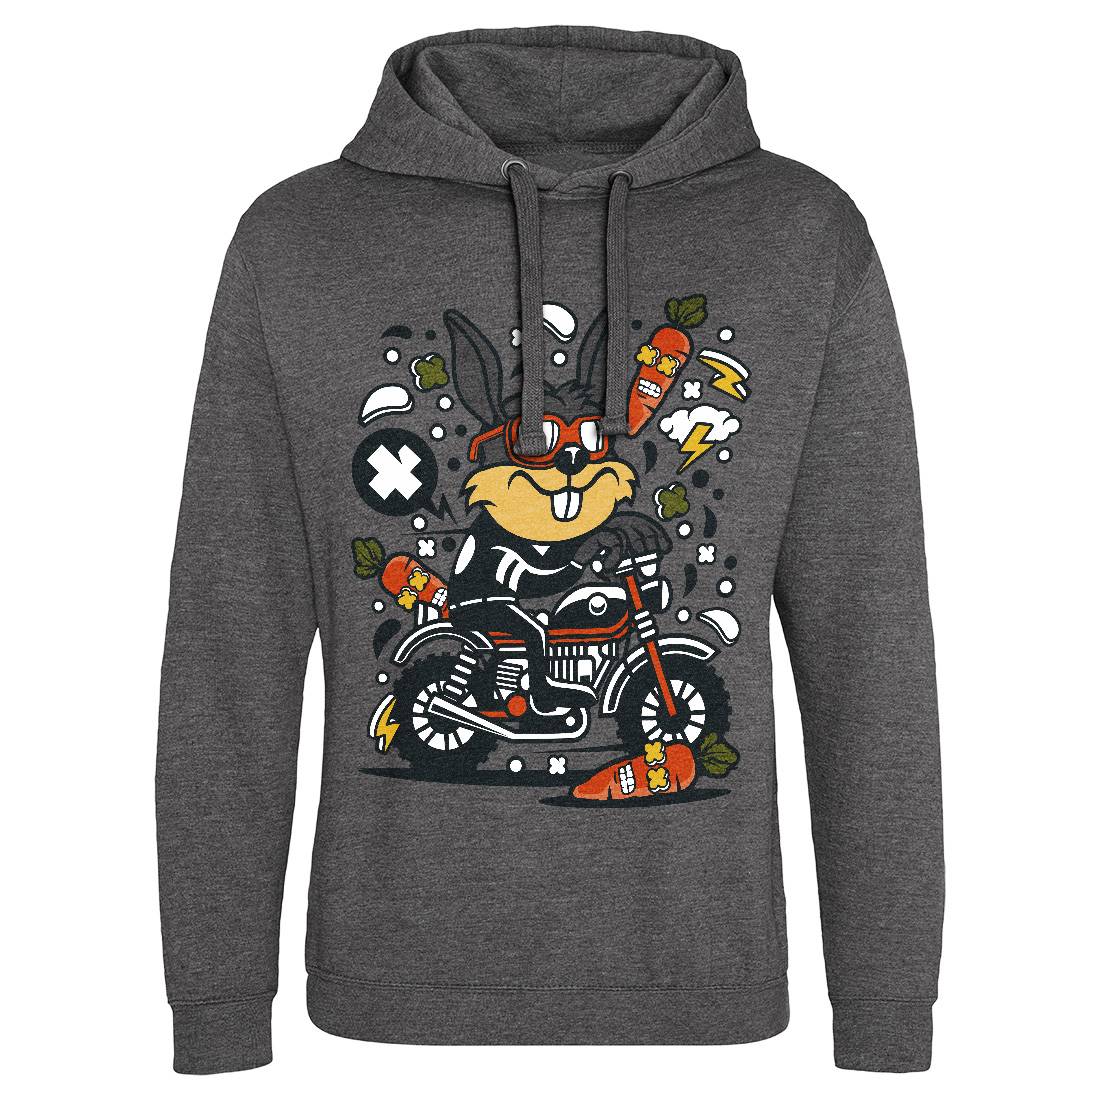 Rabbit Motocross Mens Hoodie Without Pocket Motorcycles C614